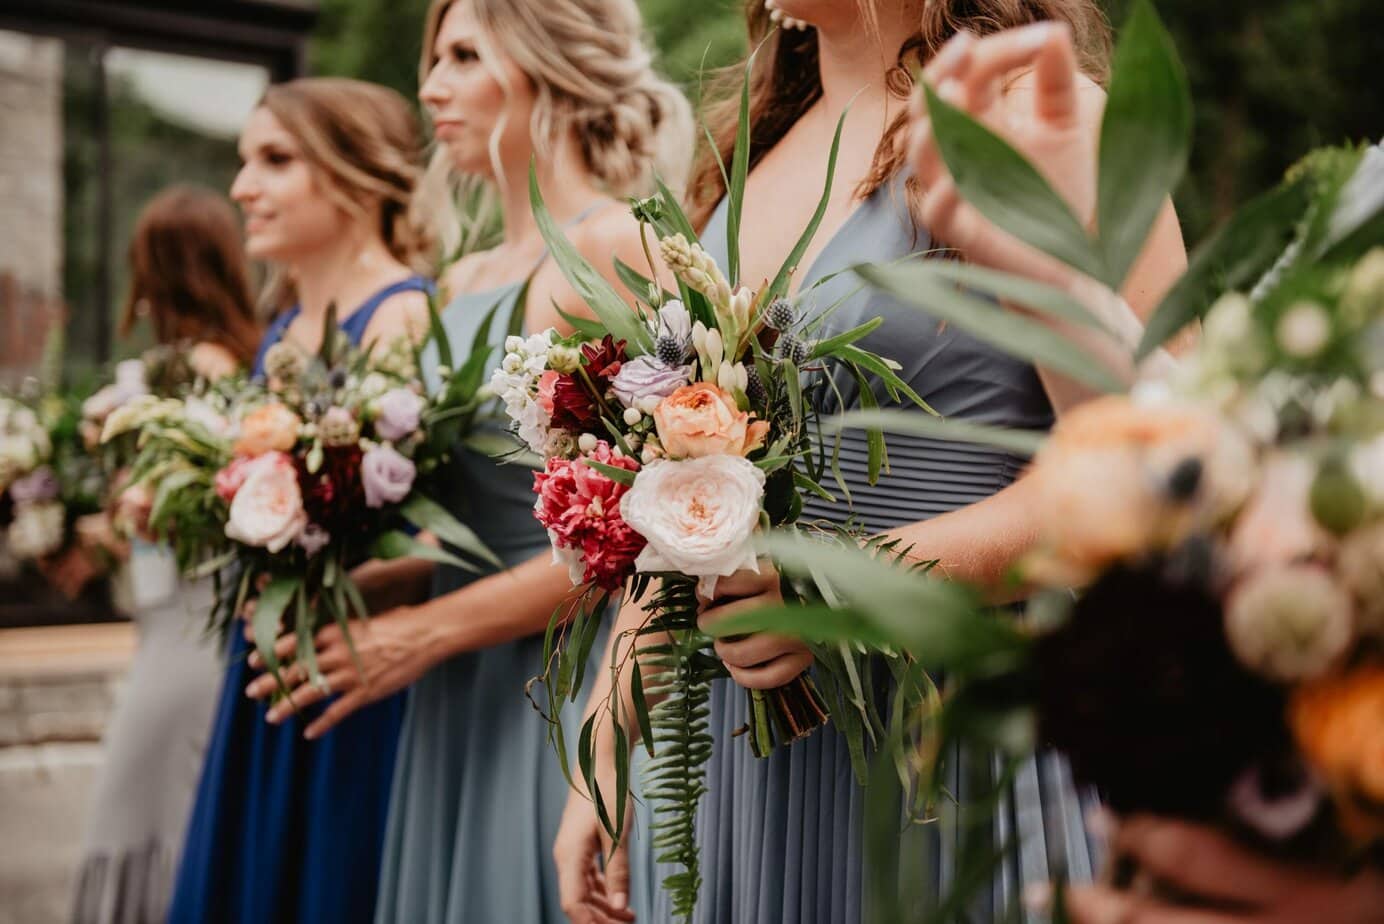 Perfectly Chosen Bridesmaid Dresses for a Picture Perfect Moment